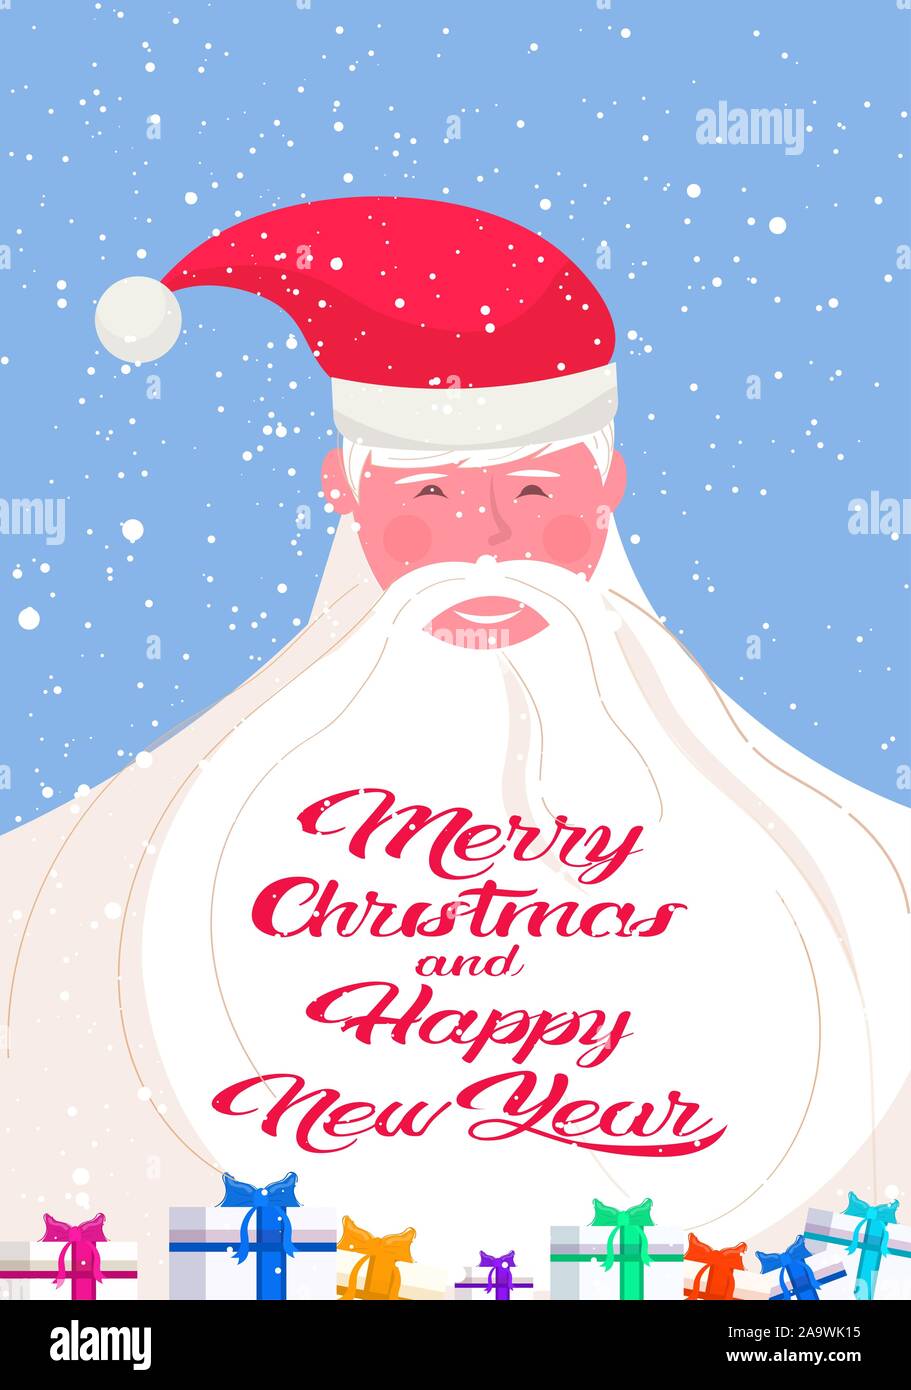 merry christmas and happy new year lettering on santa claus white beard winter holidays celebration concept greeting card portrait vertical vector illustration Stock Vector